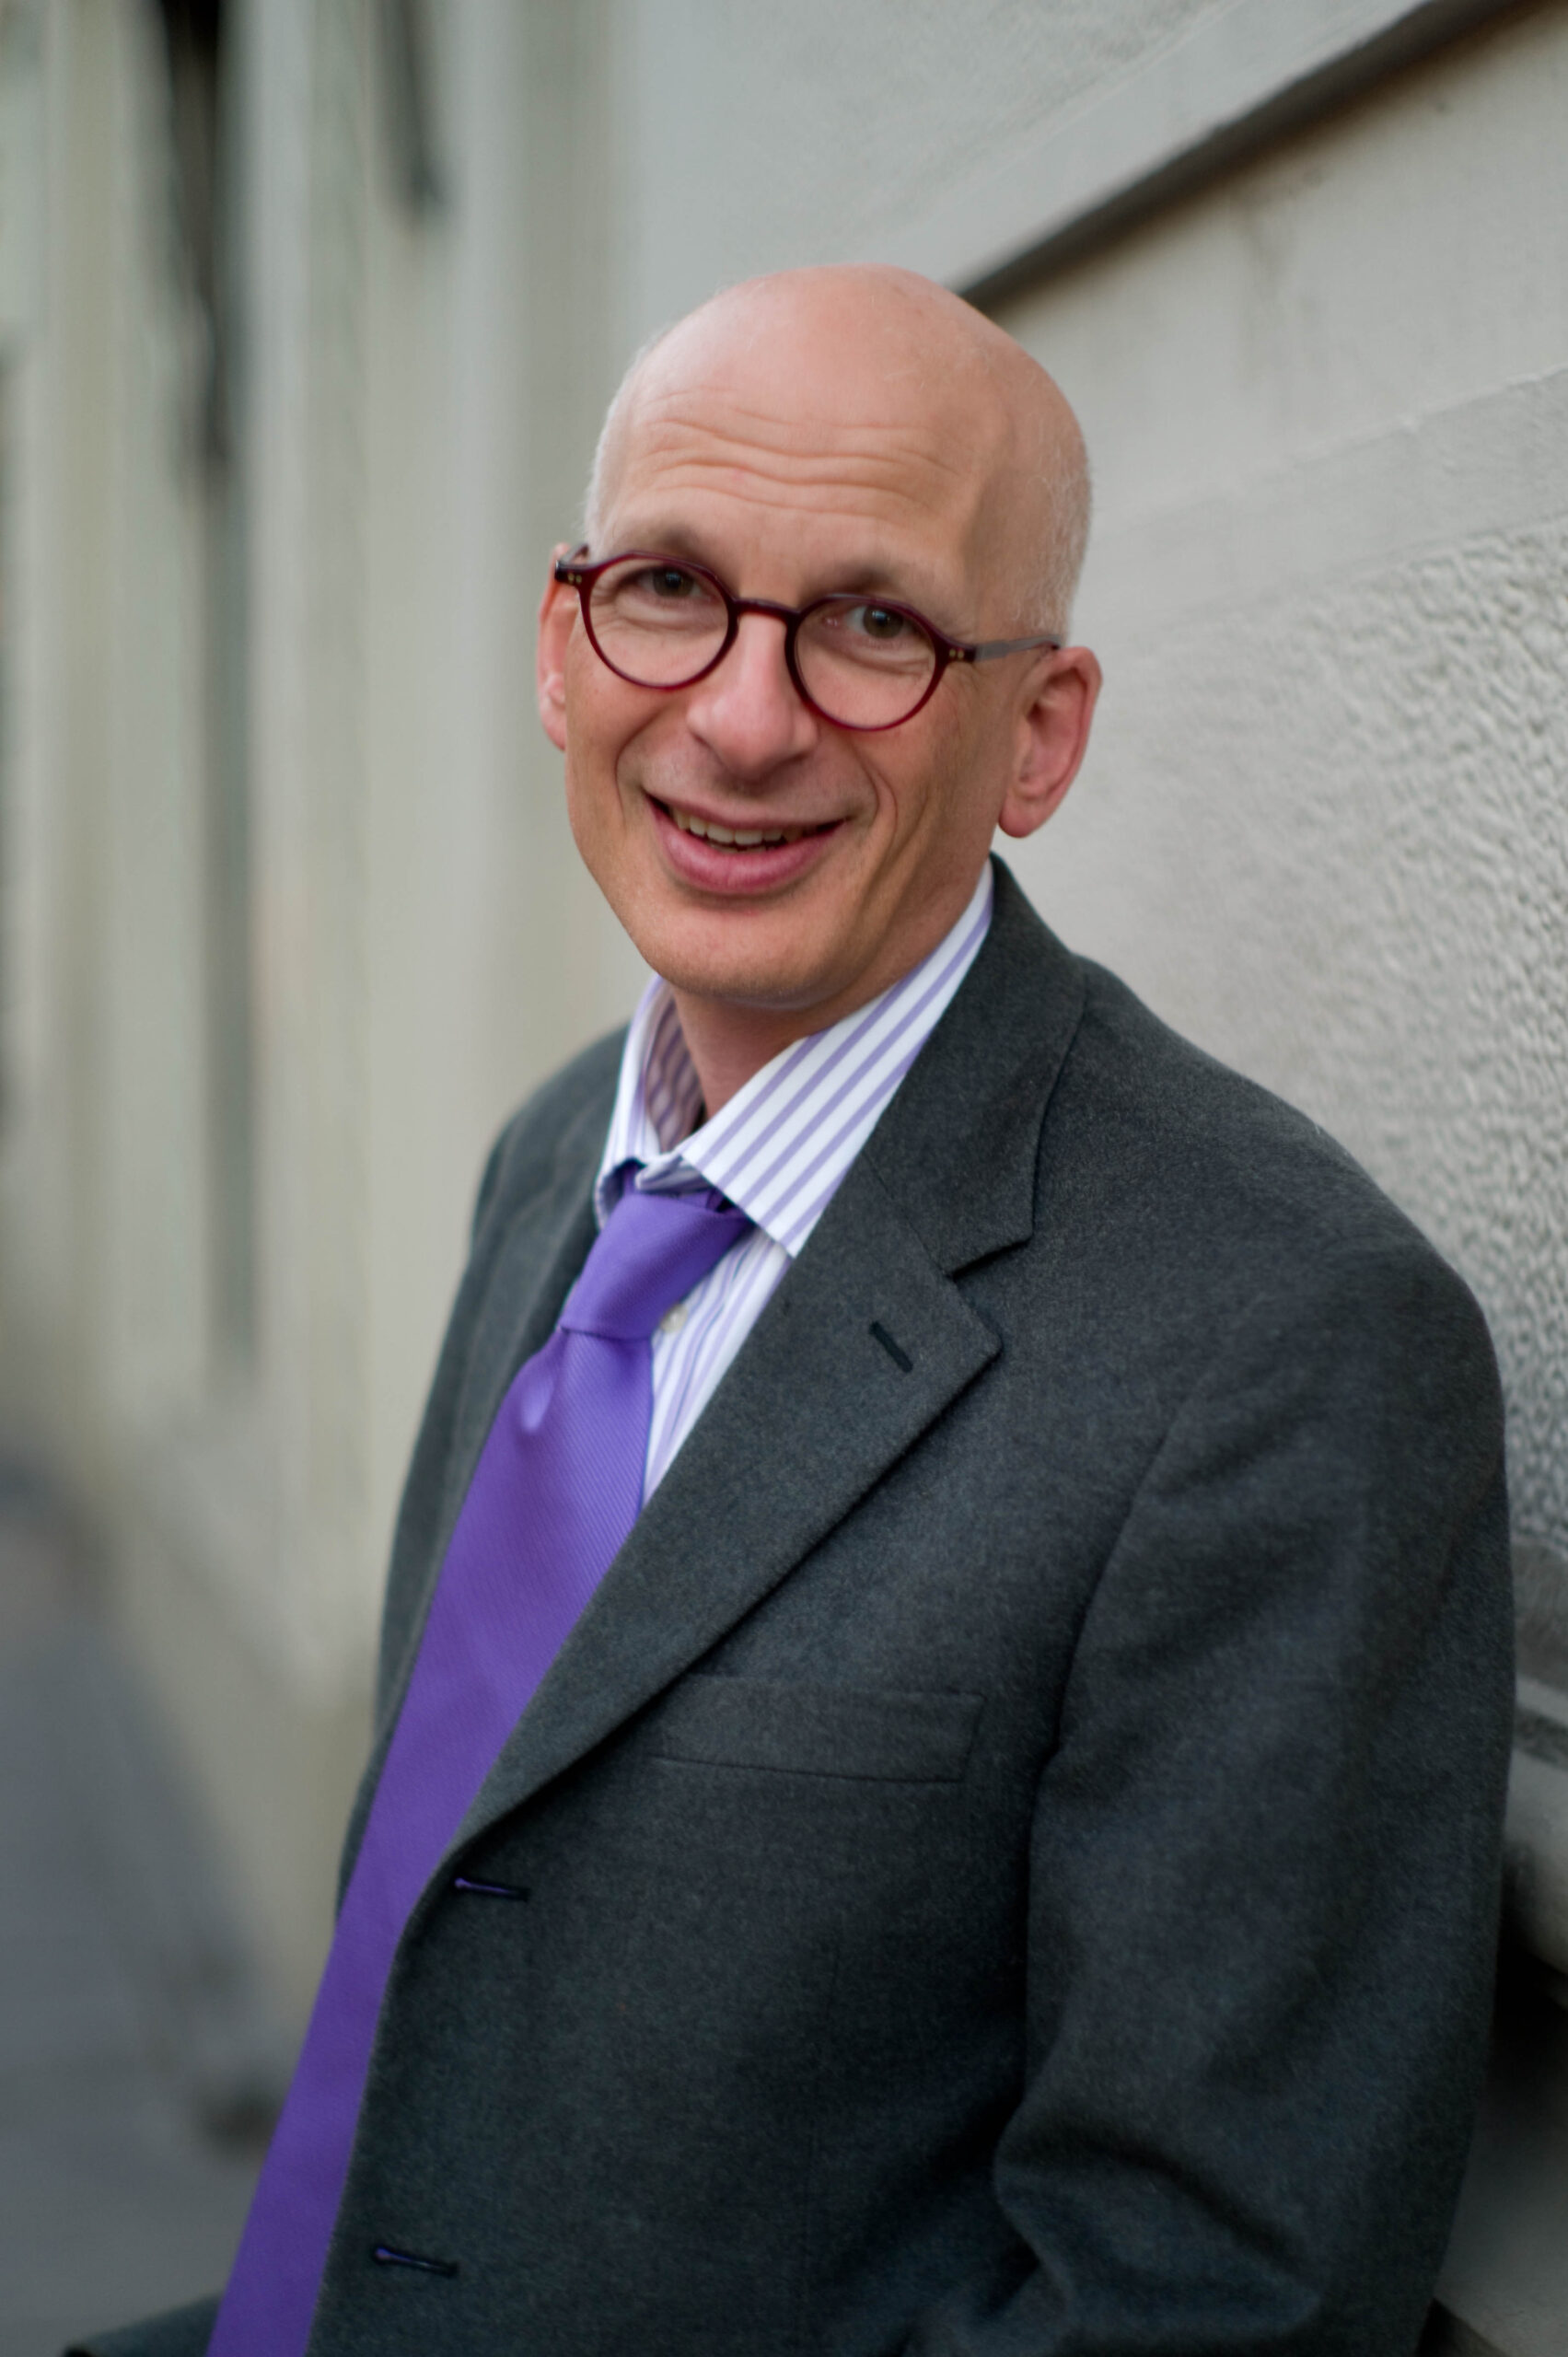 Seth Godin wearing a suit with a purple tie.